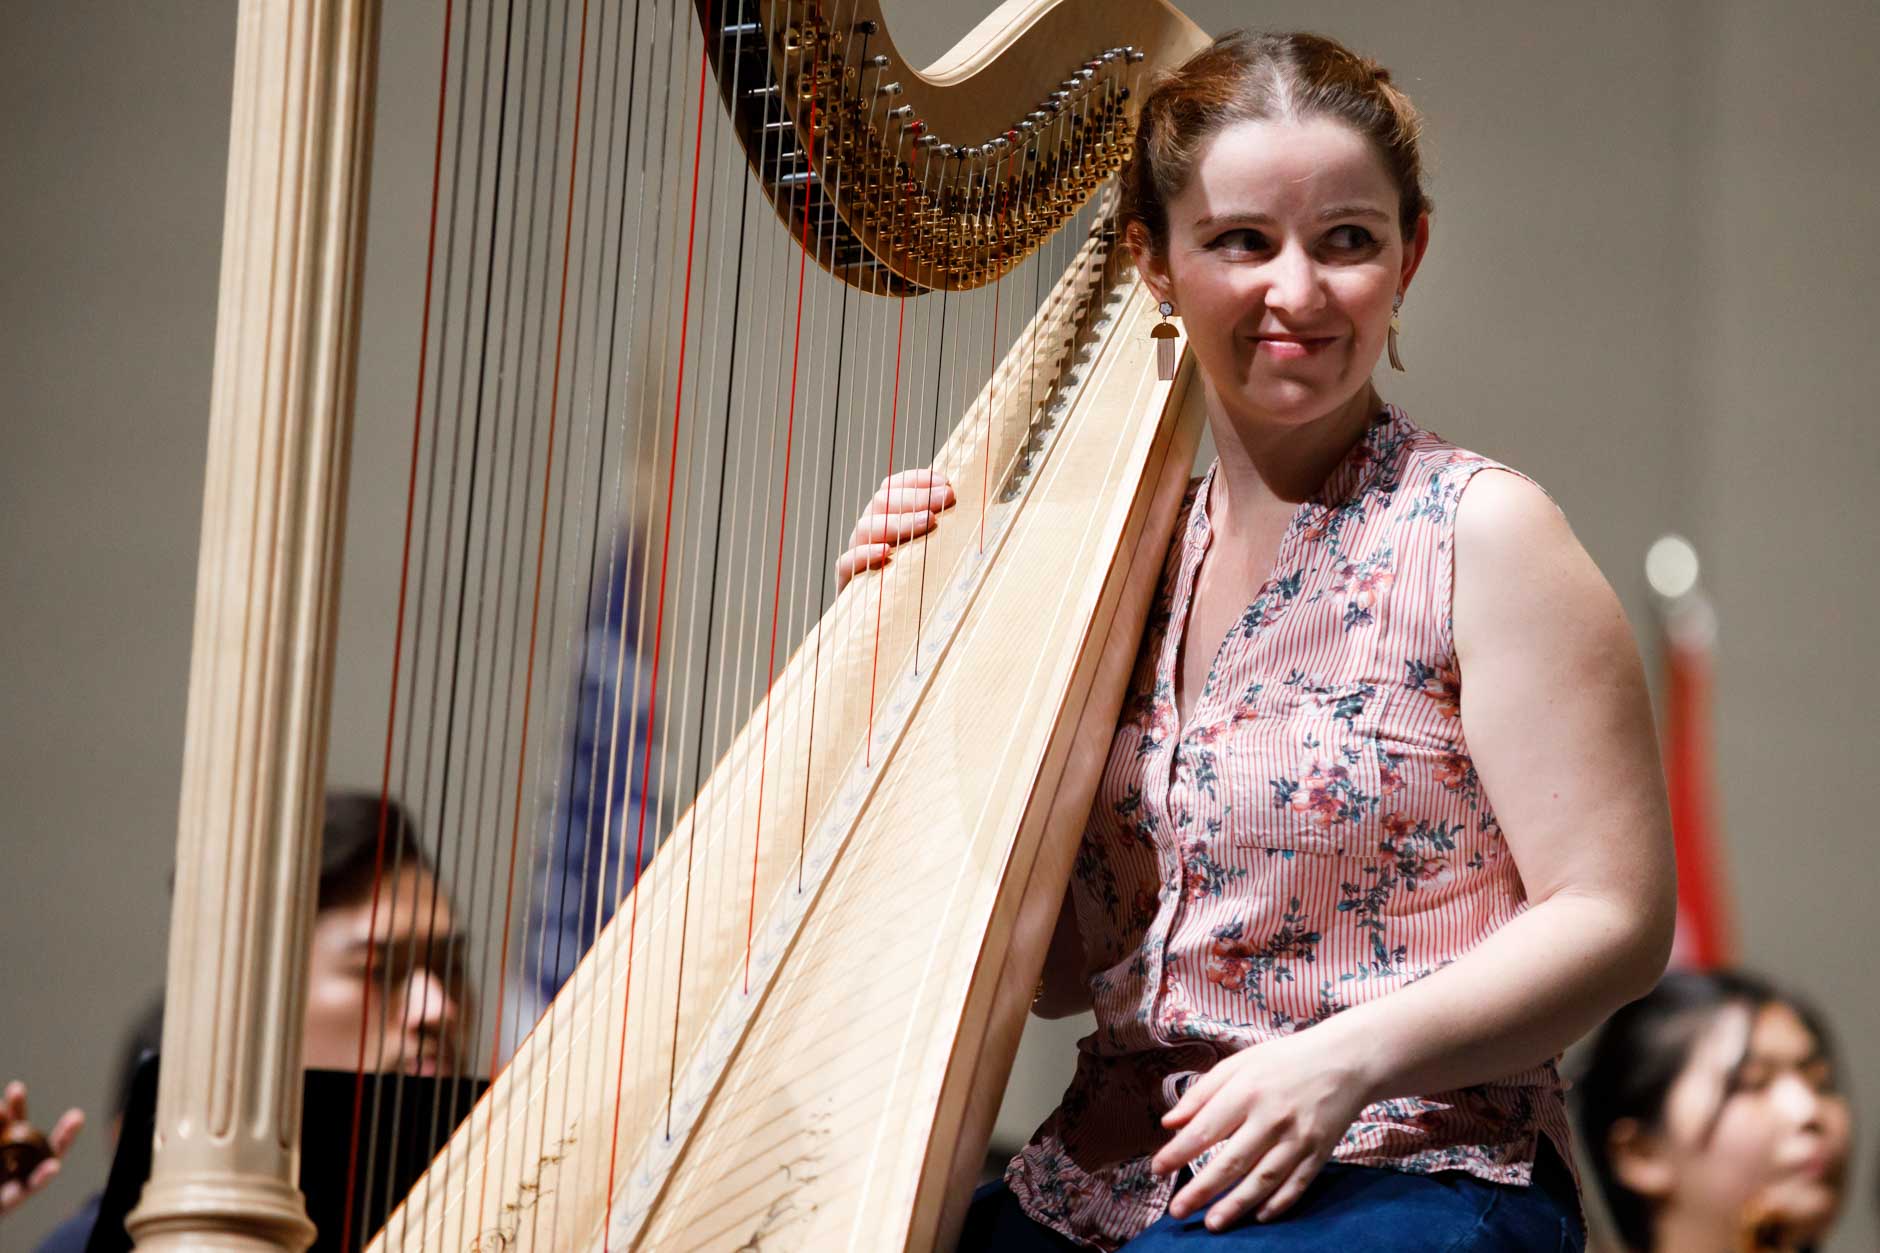 Melanie Laurent from France performs during an orchestra rehearsal for the Final Stage concert at the 11th USA International Harp Competition at Indiana University in Bloomington, Indiana on Friday, July 12, 2019. (Photo by James Brosher)